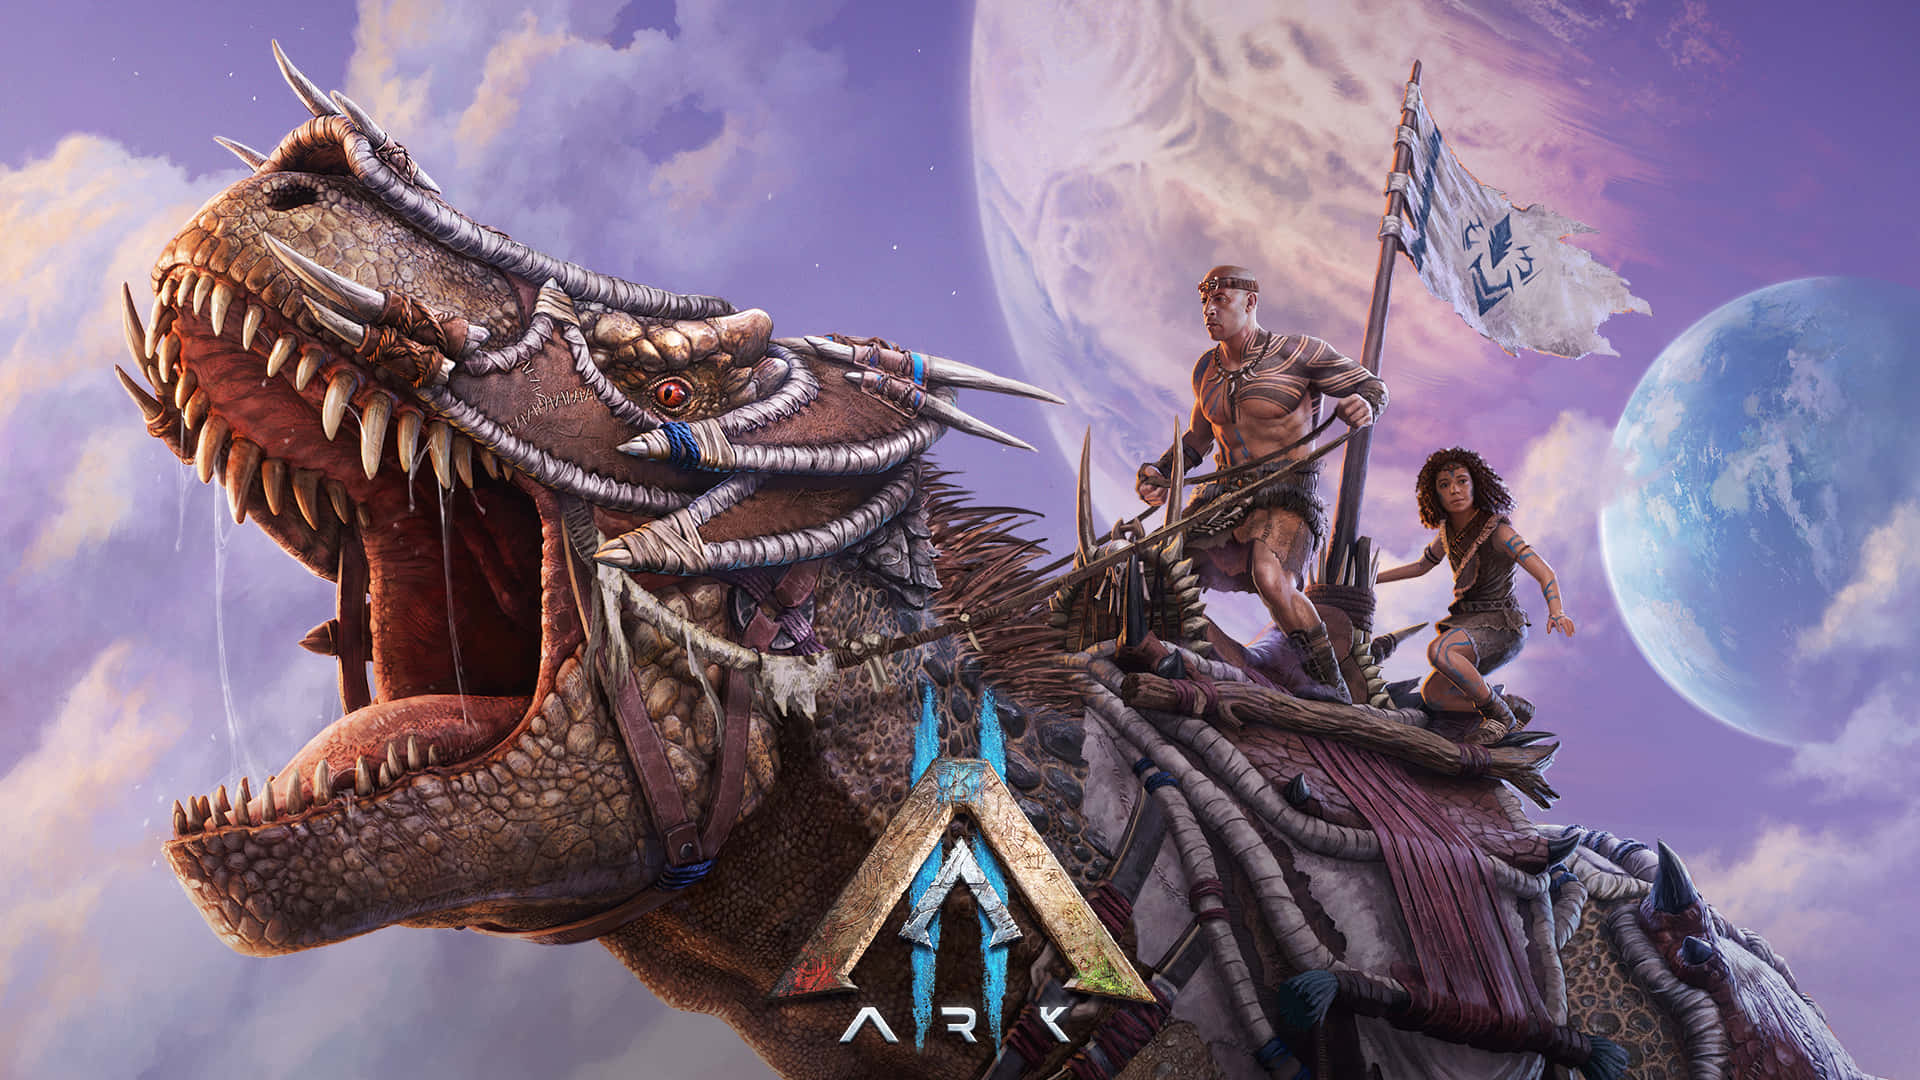 Ark Iii - A Dinosaur And Two People Riding On It Wallpaper